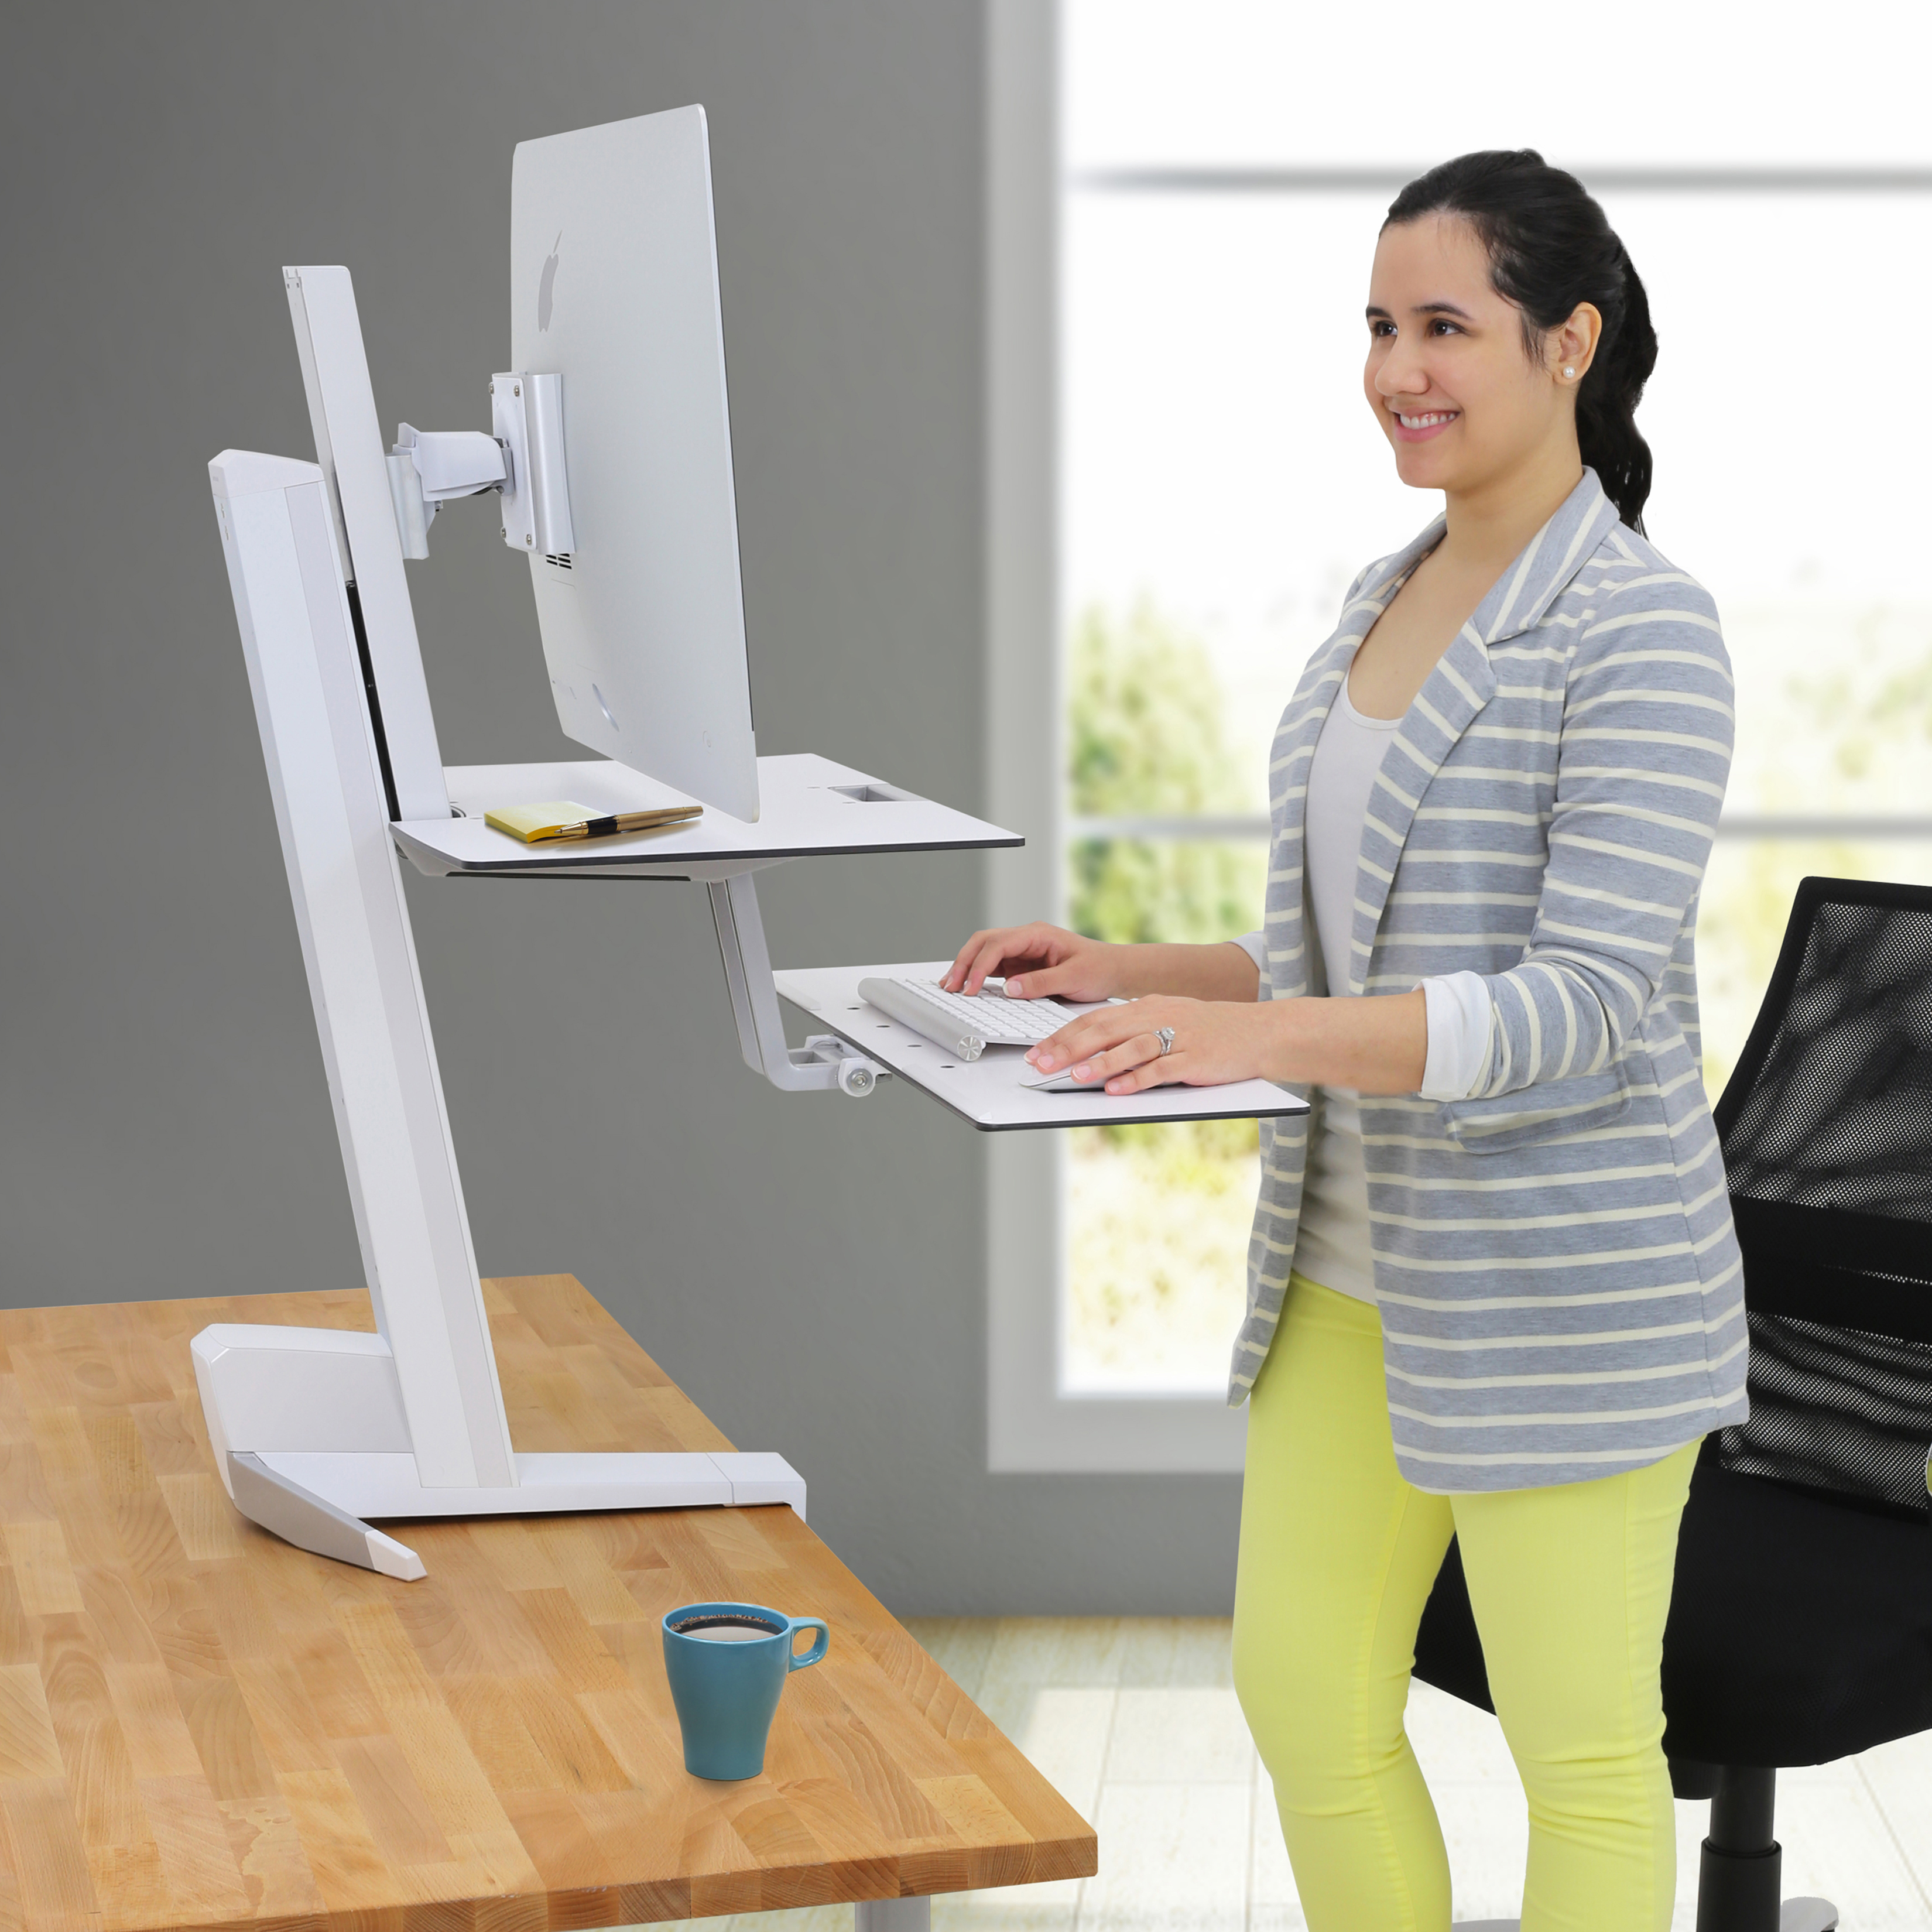 Ergotron WorkFit-S, Single LD with Worksurface+ (White) - image 2 of 2